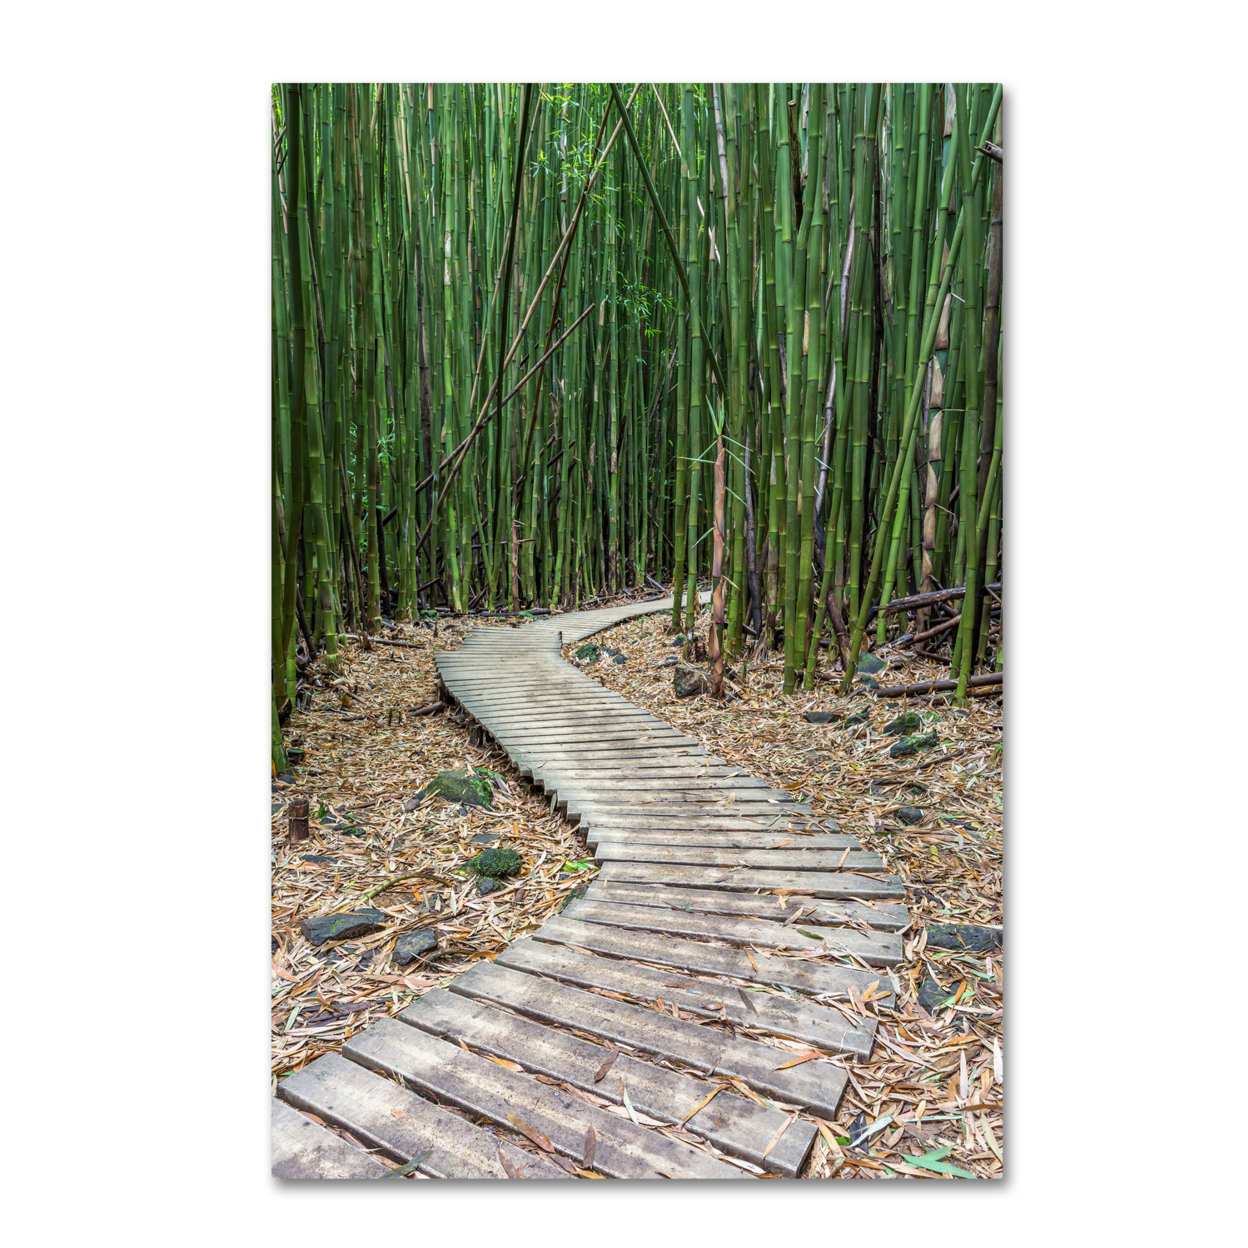 Pierre Leclerc 'Hiking Through The Bamboo Forest' Canvas Art 16 X 24